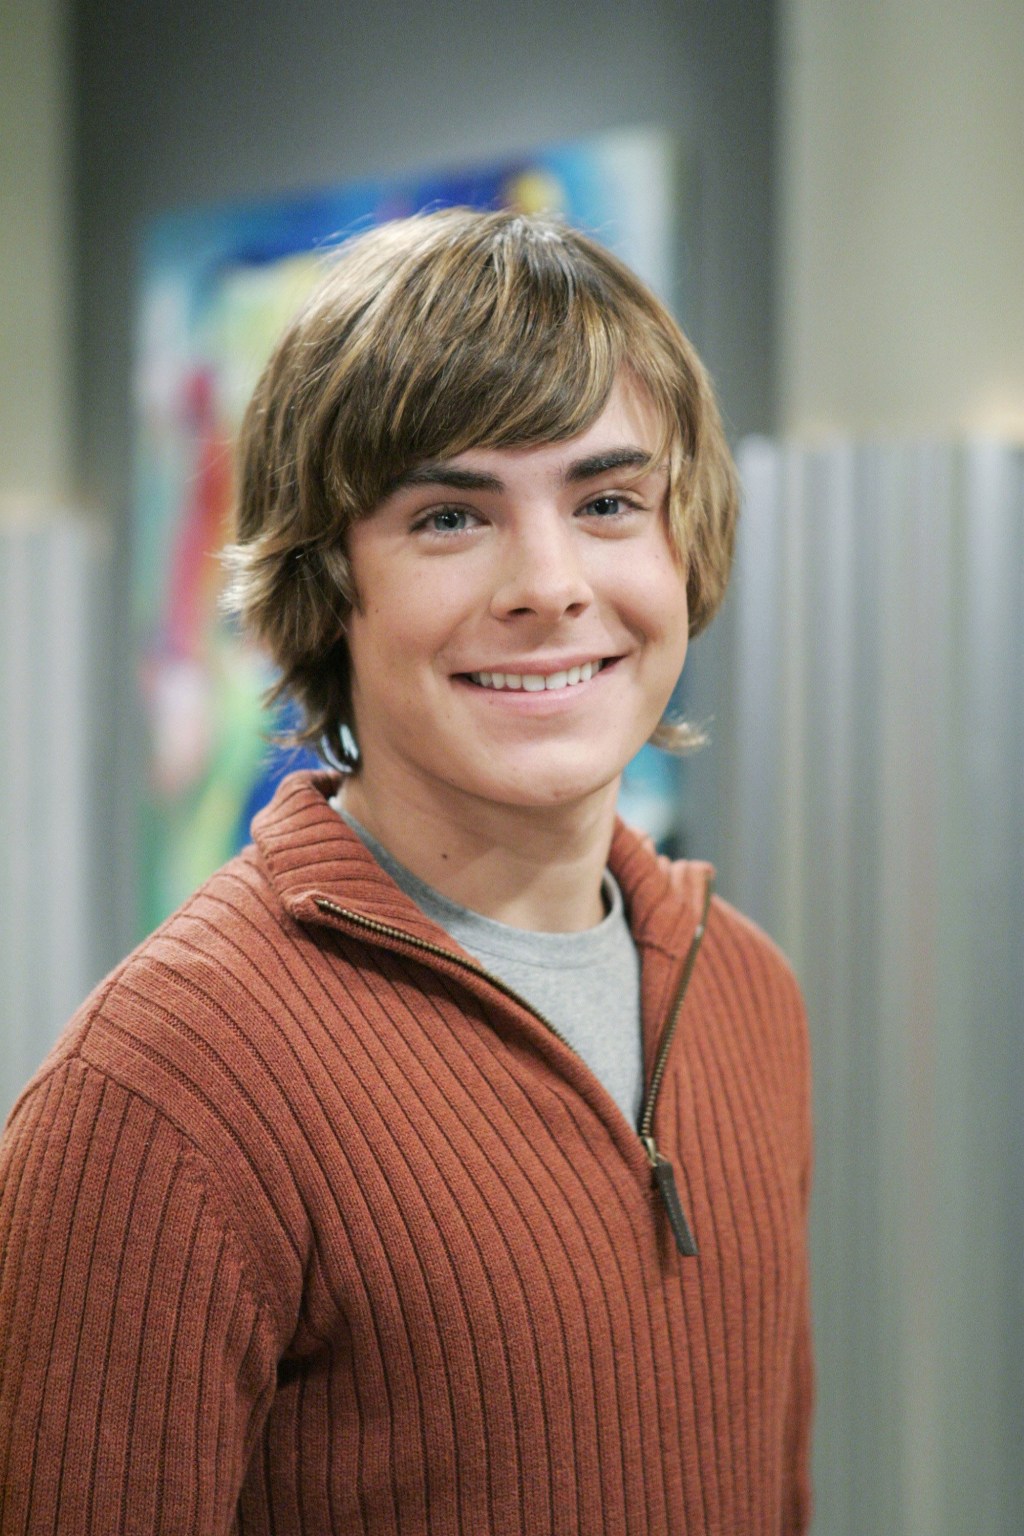 The Suite Life Of Zack and Cody, Zac Efron